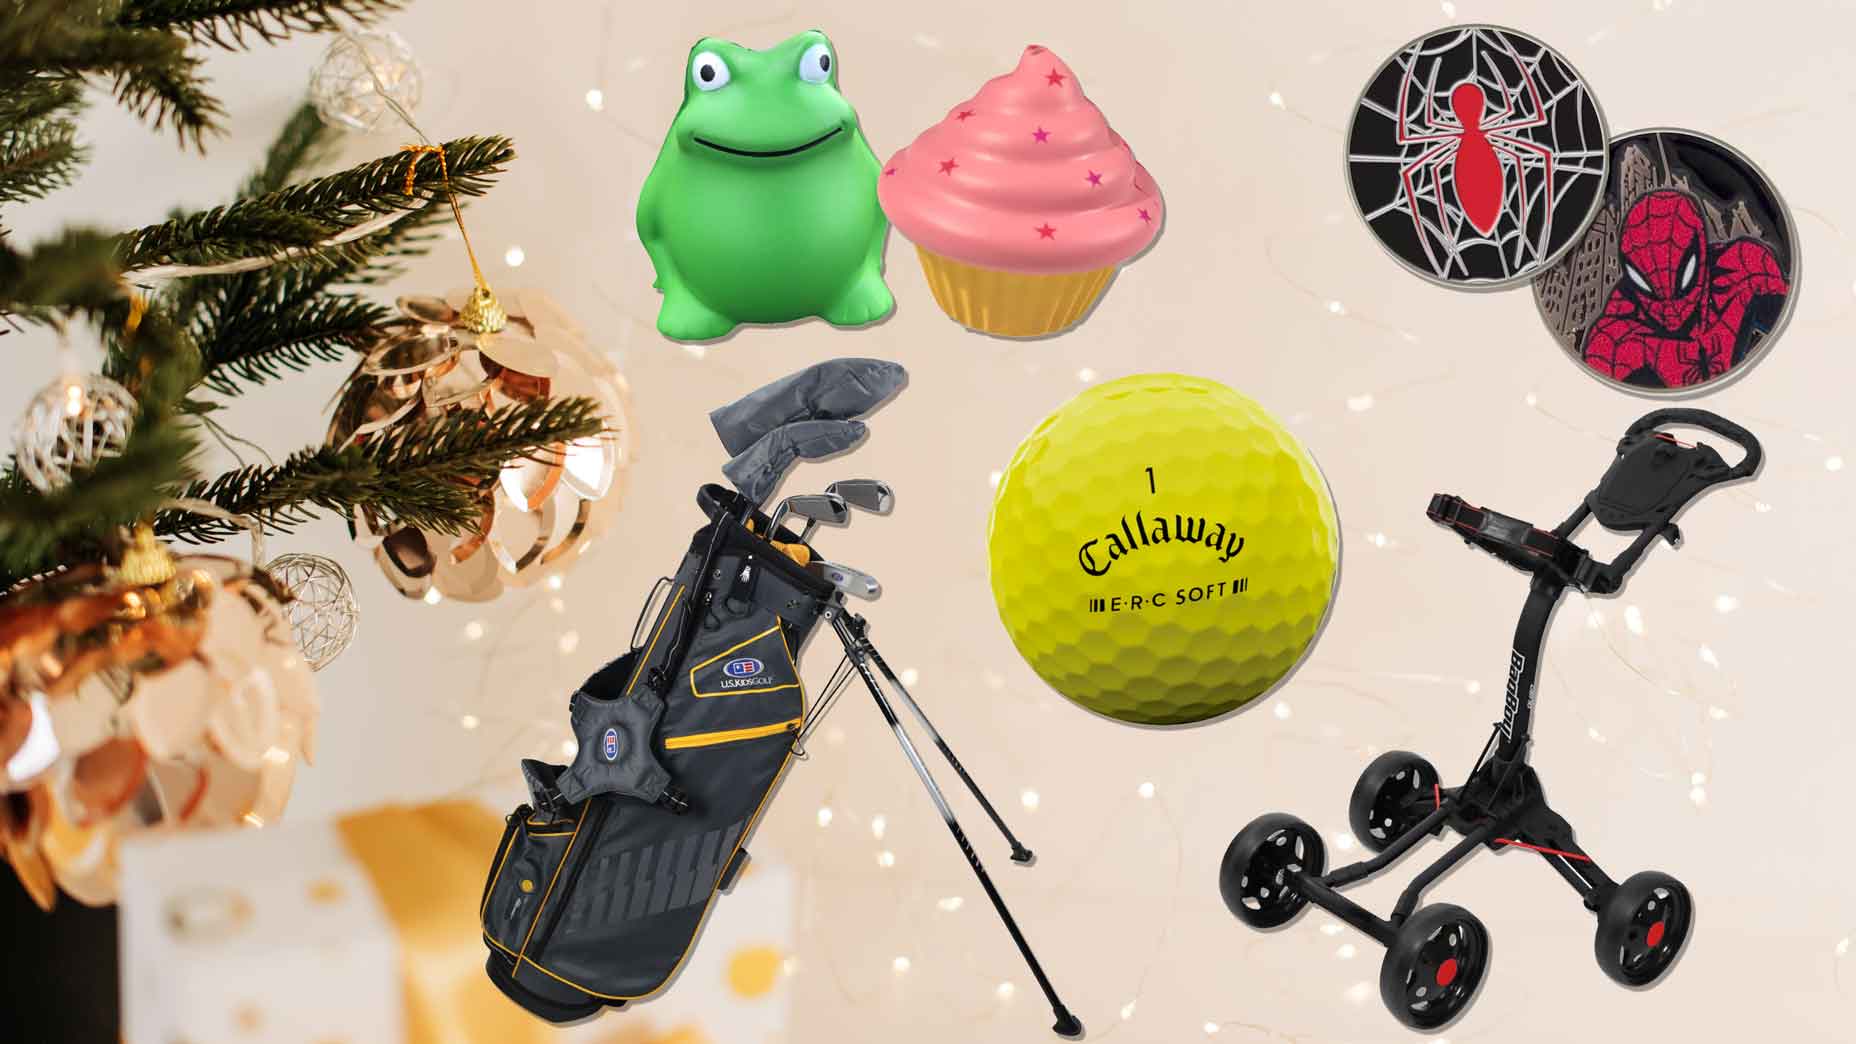 The best gifts for junior golfers, according to the top junior players in  the world, Golf Equipment: Clubs, Balls, Bags